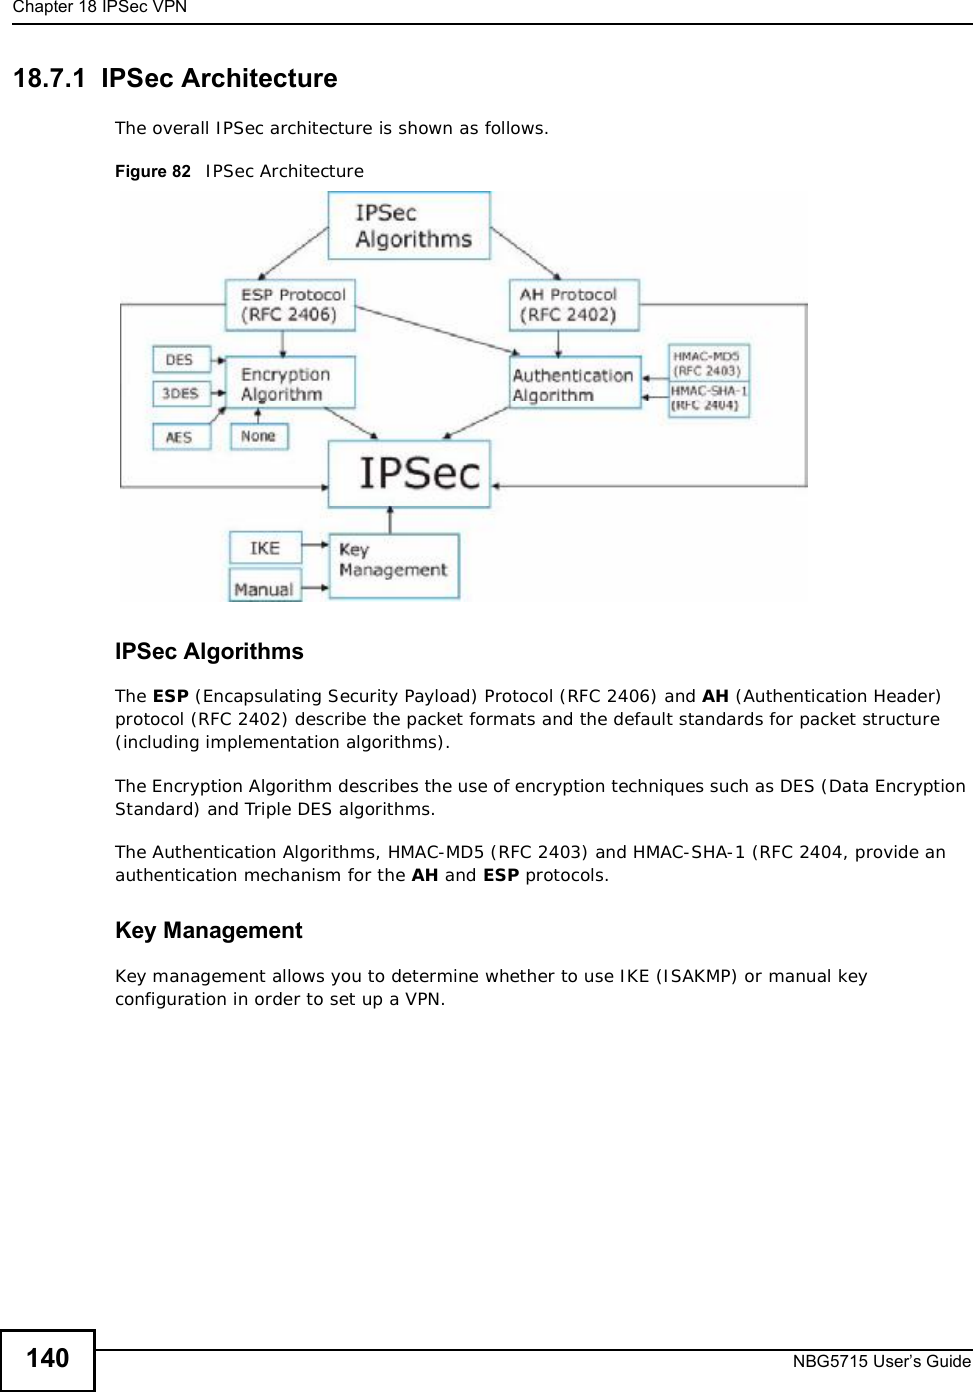 Chapter 18IPSec VPNNBG5715 User’s Guide14018.7.1  IPSec ArchitectureThe overall IPSec architecture is shown as follows.Figure 82   IPSec ArchitectureIPSec AlgorithmsThe ESP (Encapsulating Security Payload) Protocol (RFC 2406) and AH (Authentication Header) protocol (RFC 2402) describe the packet formats and the default standards for packet structure (including implementation algorithms).The Encryption Algorithm describes the use of encryption techniques such as DES (Data Encryption Standard) and Triple DES algorithms.The Authentication Algorithms, HMAC-MD5 (RFC 2403) and HMAC-SHA-1 (RFC 2404, provide an authentication mechanism for the AH and ESP protocols. Key ManagementKey management allows you to determine whether to use IKE (ISAKMP) or manual key configuration in order to set up a VPN.